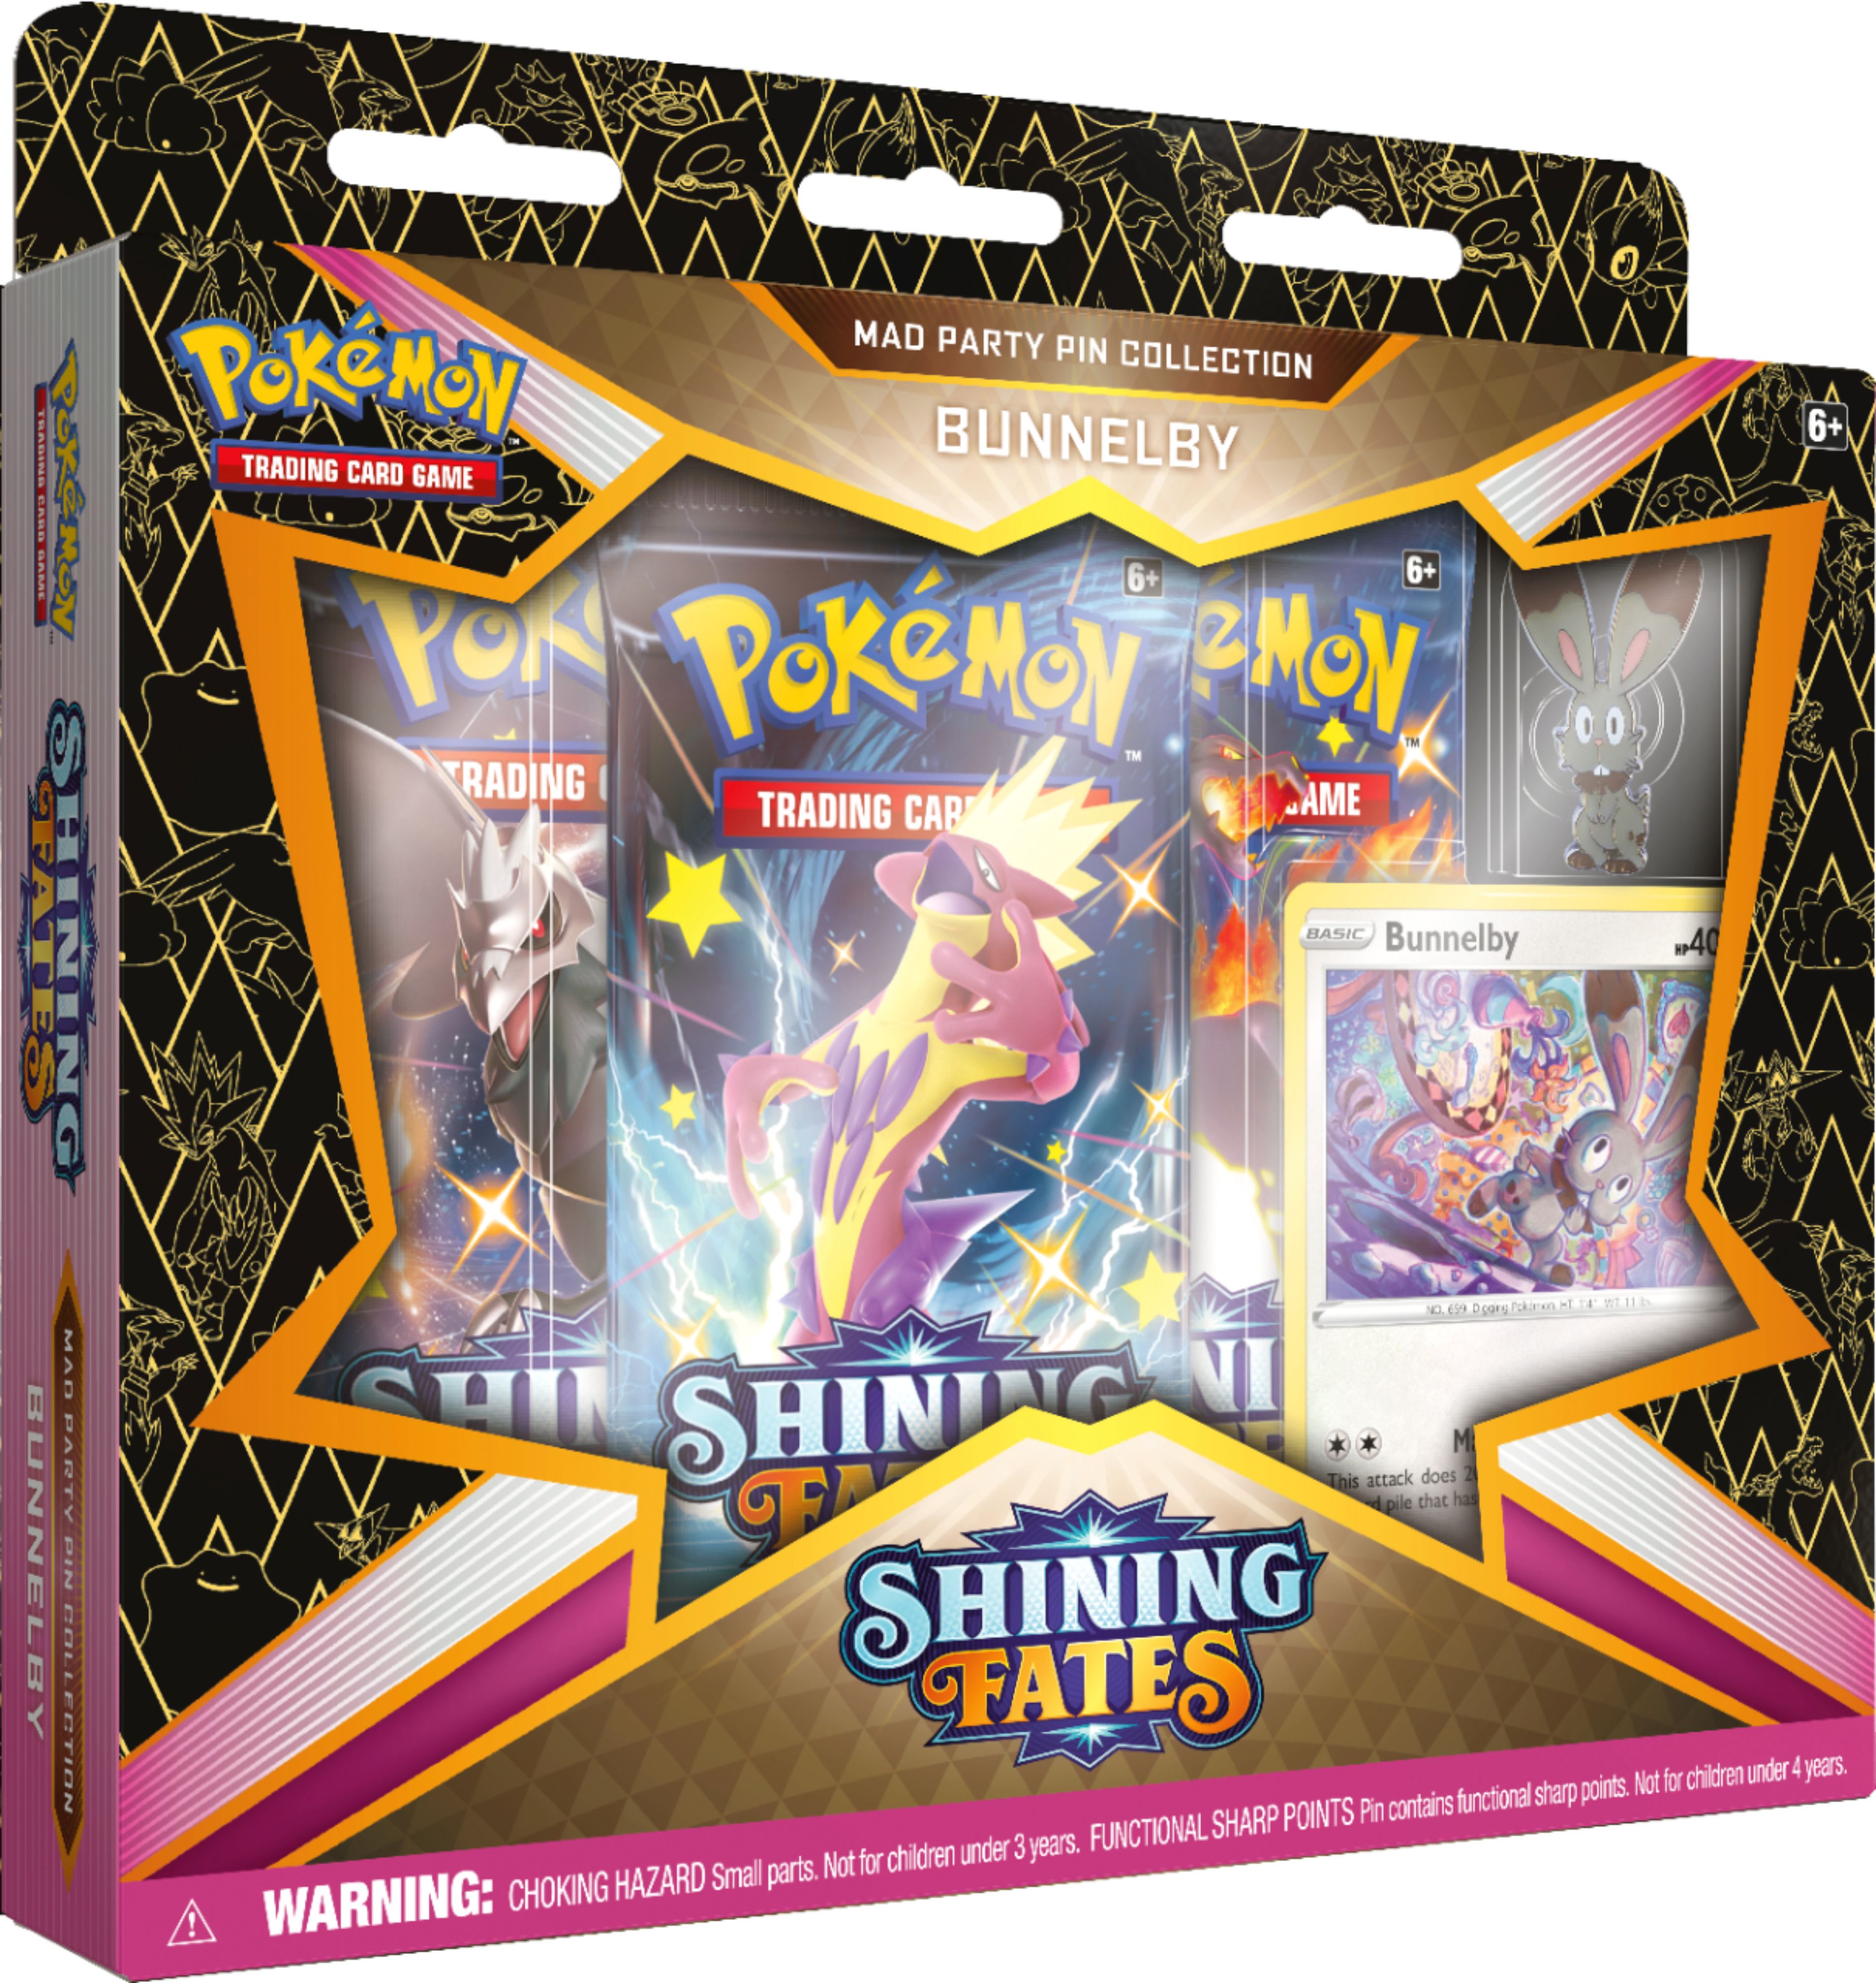 24 Packs/8 Box Pokemon TCG Shining Fates Mad Party Pin Collection Sealed Case 